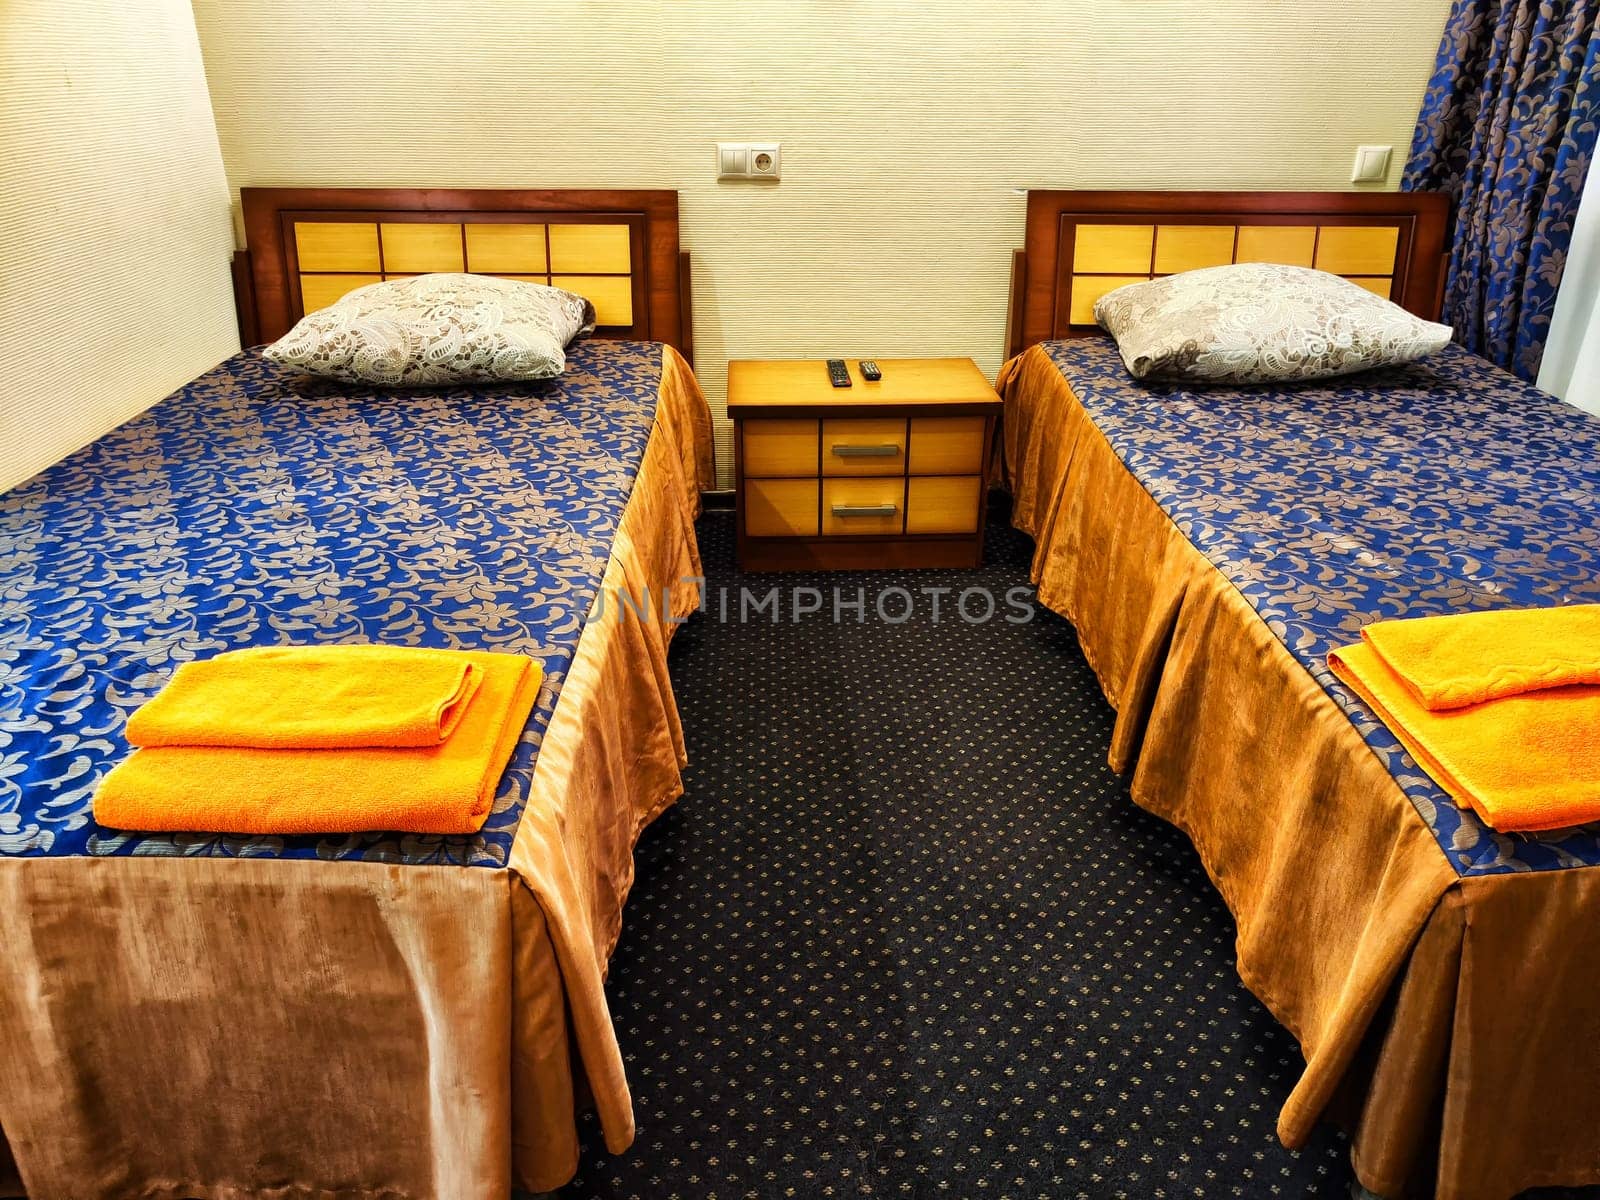 Twin Beds in a Cozy Hotel Room. Two single beds with blue bedding and orange towels in a hotel room by keleny